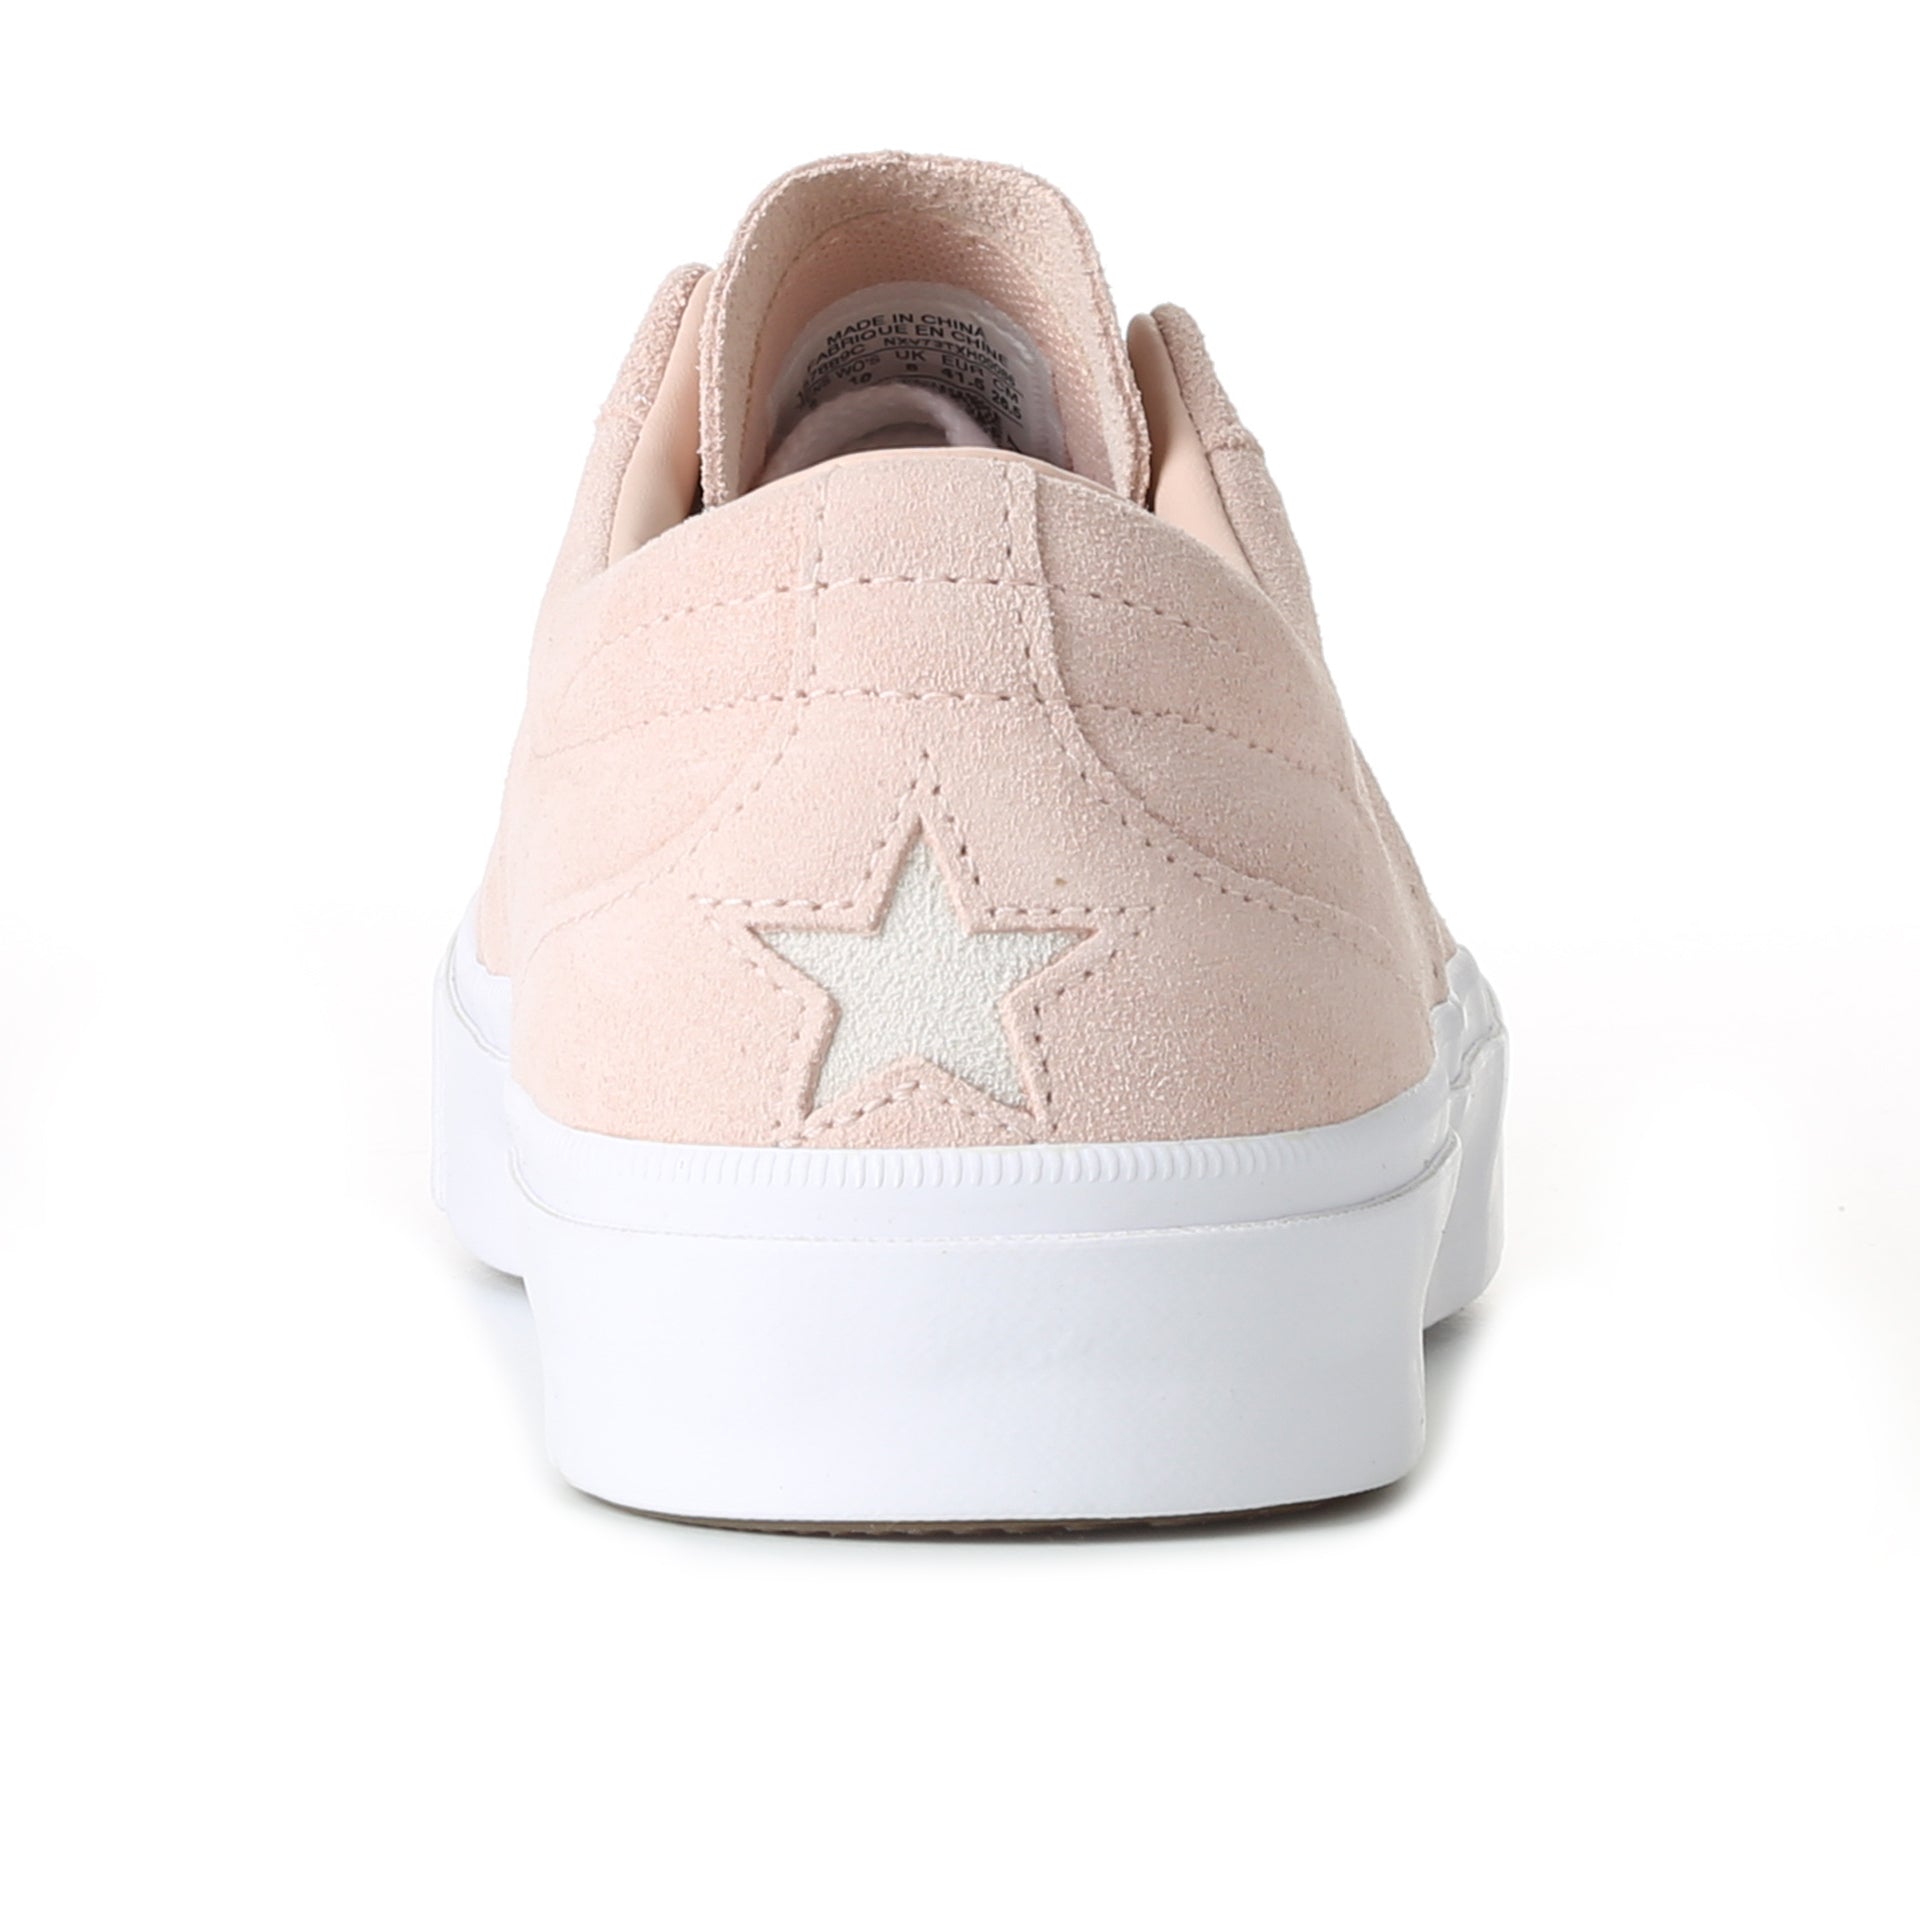 converse one star suede nz,Quality 